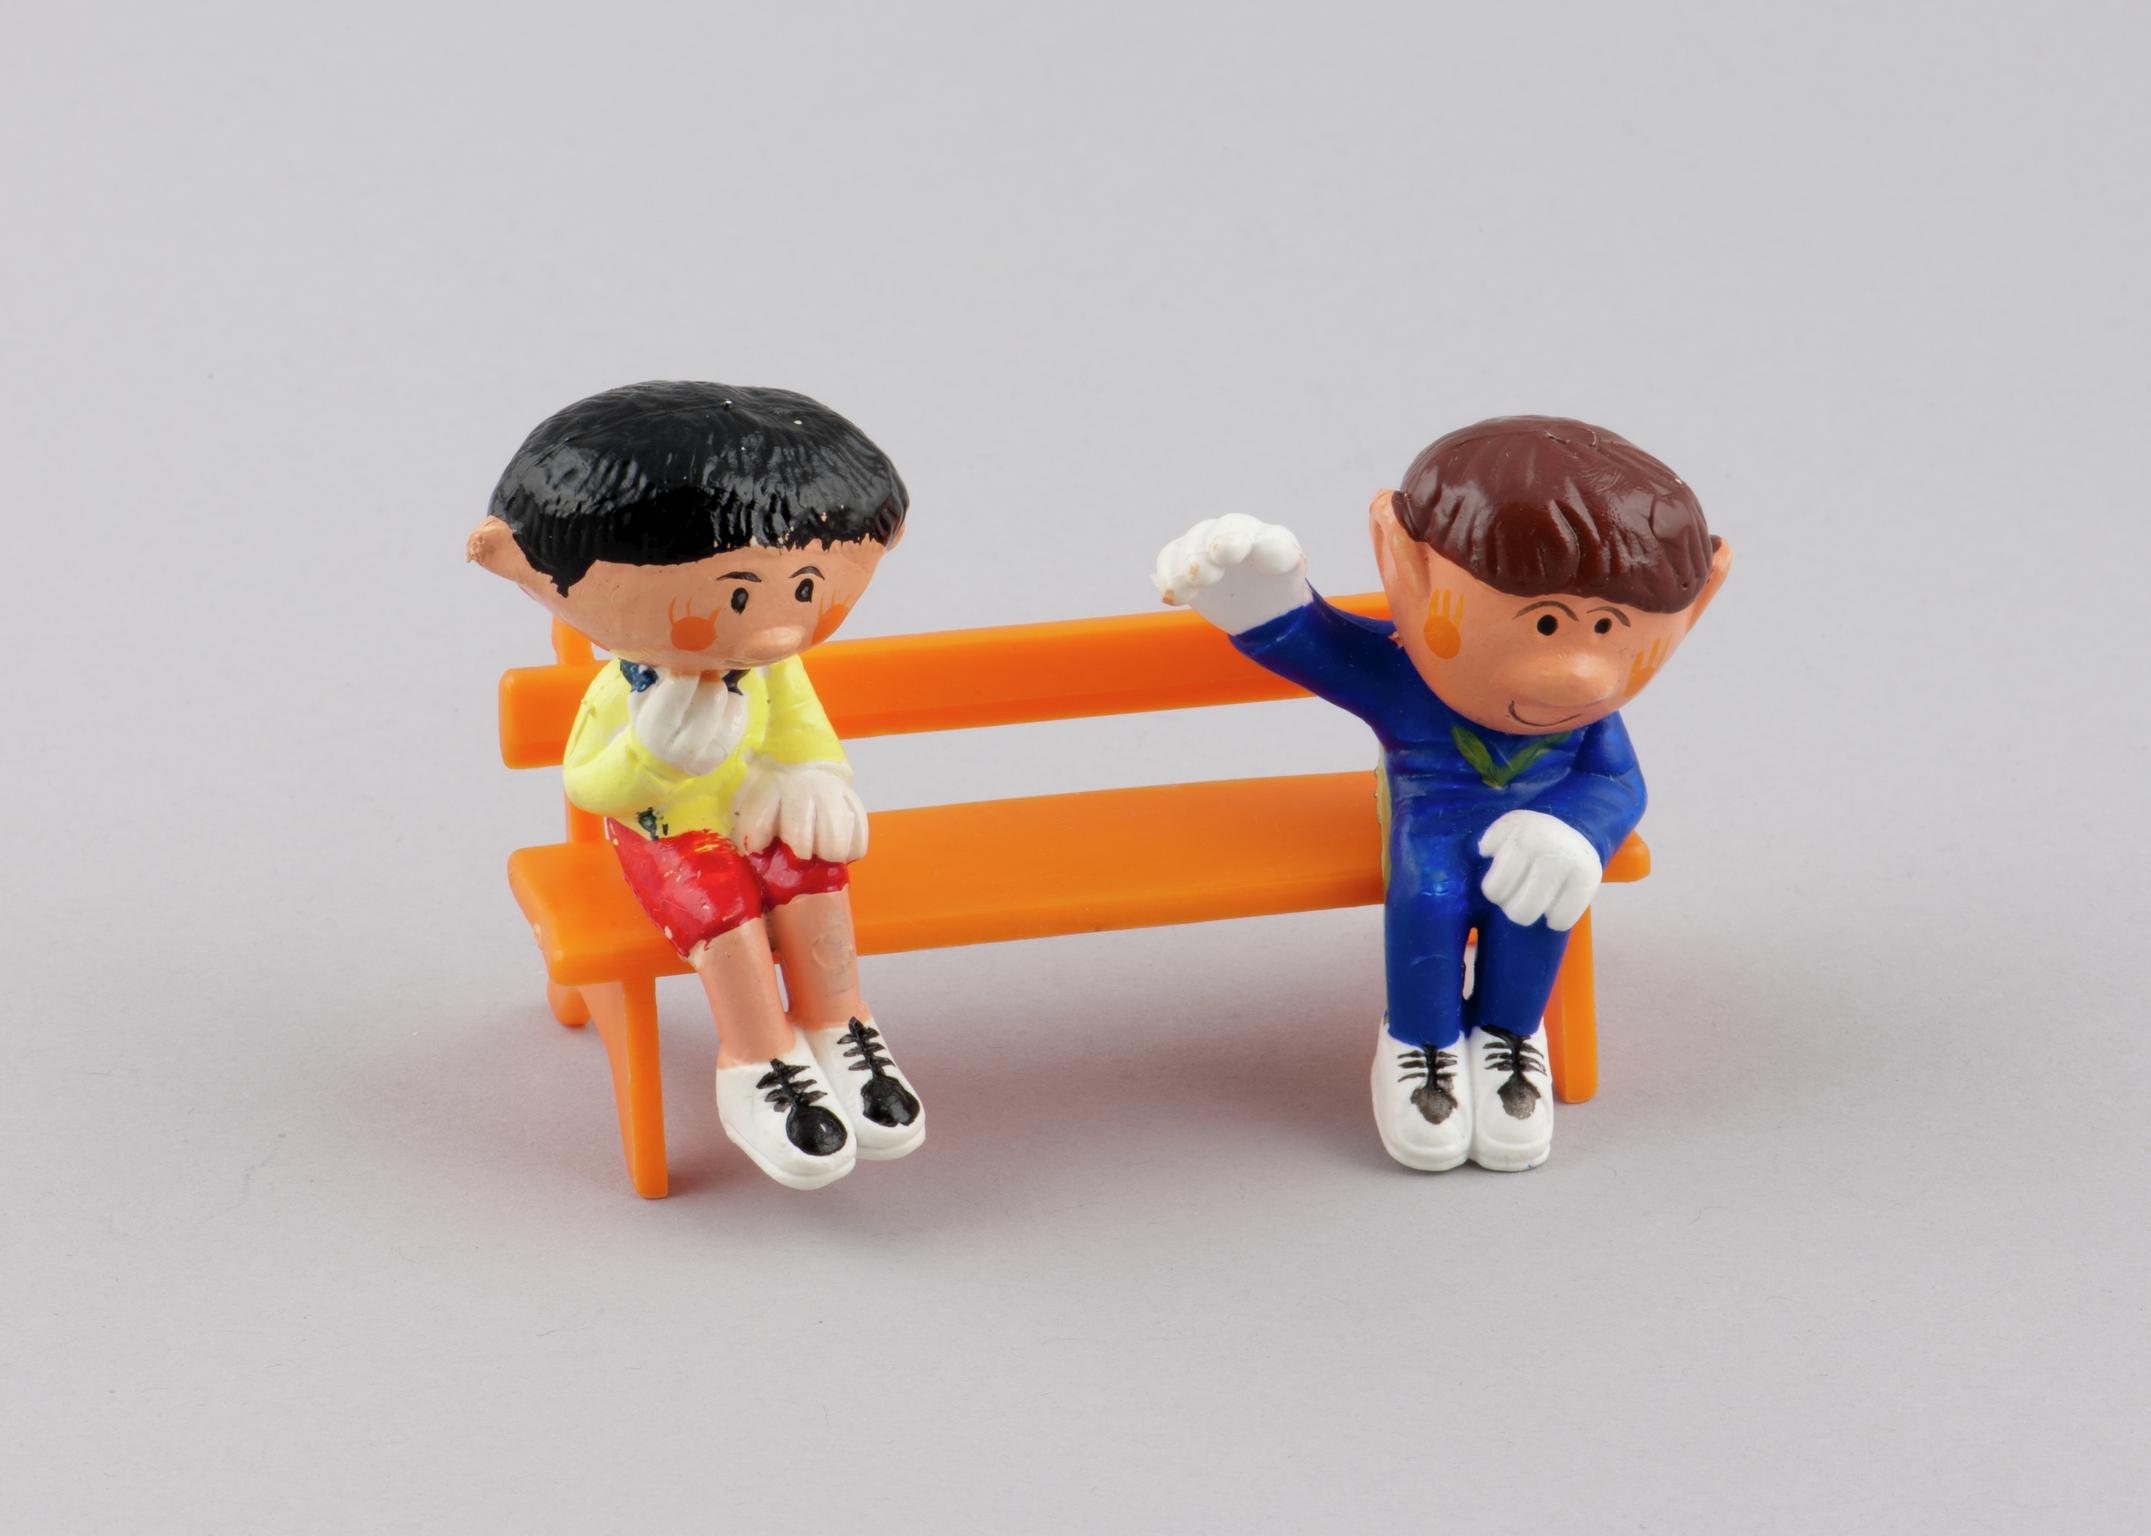 Sitting model of character Basil (2000.179/4) from the Magic Roundabout &amp; Sitting model of character Paul (2000.179.5) from the Magic Roundabout. Model of orange plastic bench (2000.179/14) with two holes on seat for figures from the Magic Roundabout to be inserted.